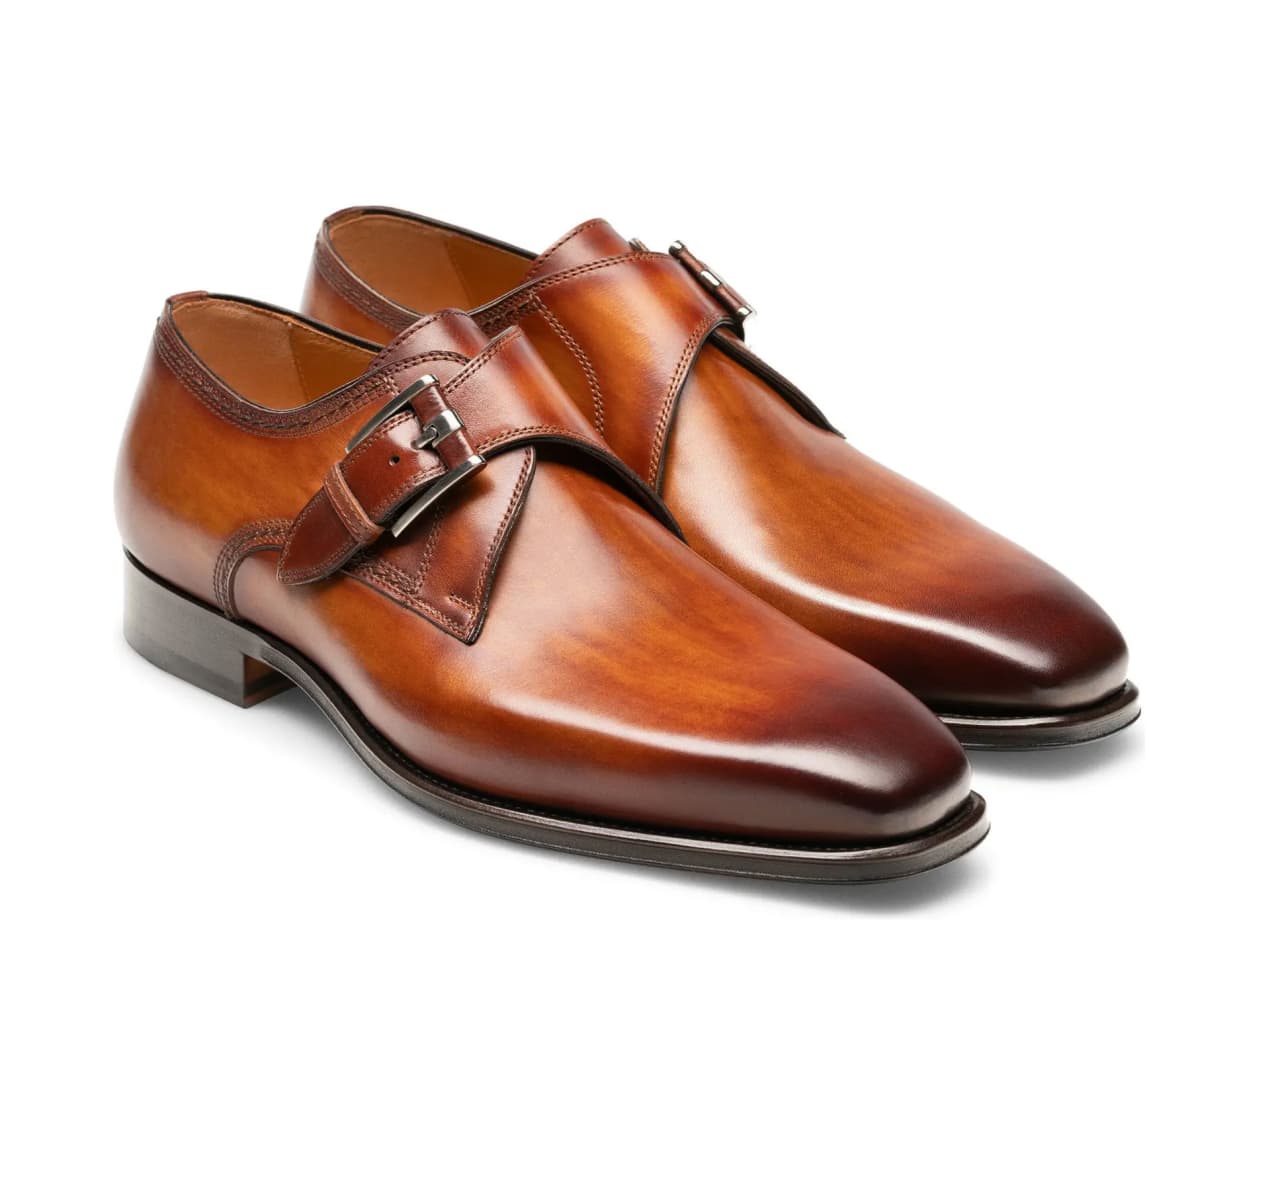 The Most Popular Brown Dress Shoes for Guys, According to Zappos